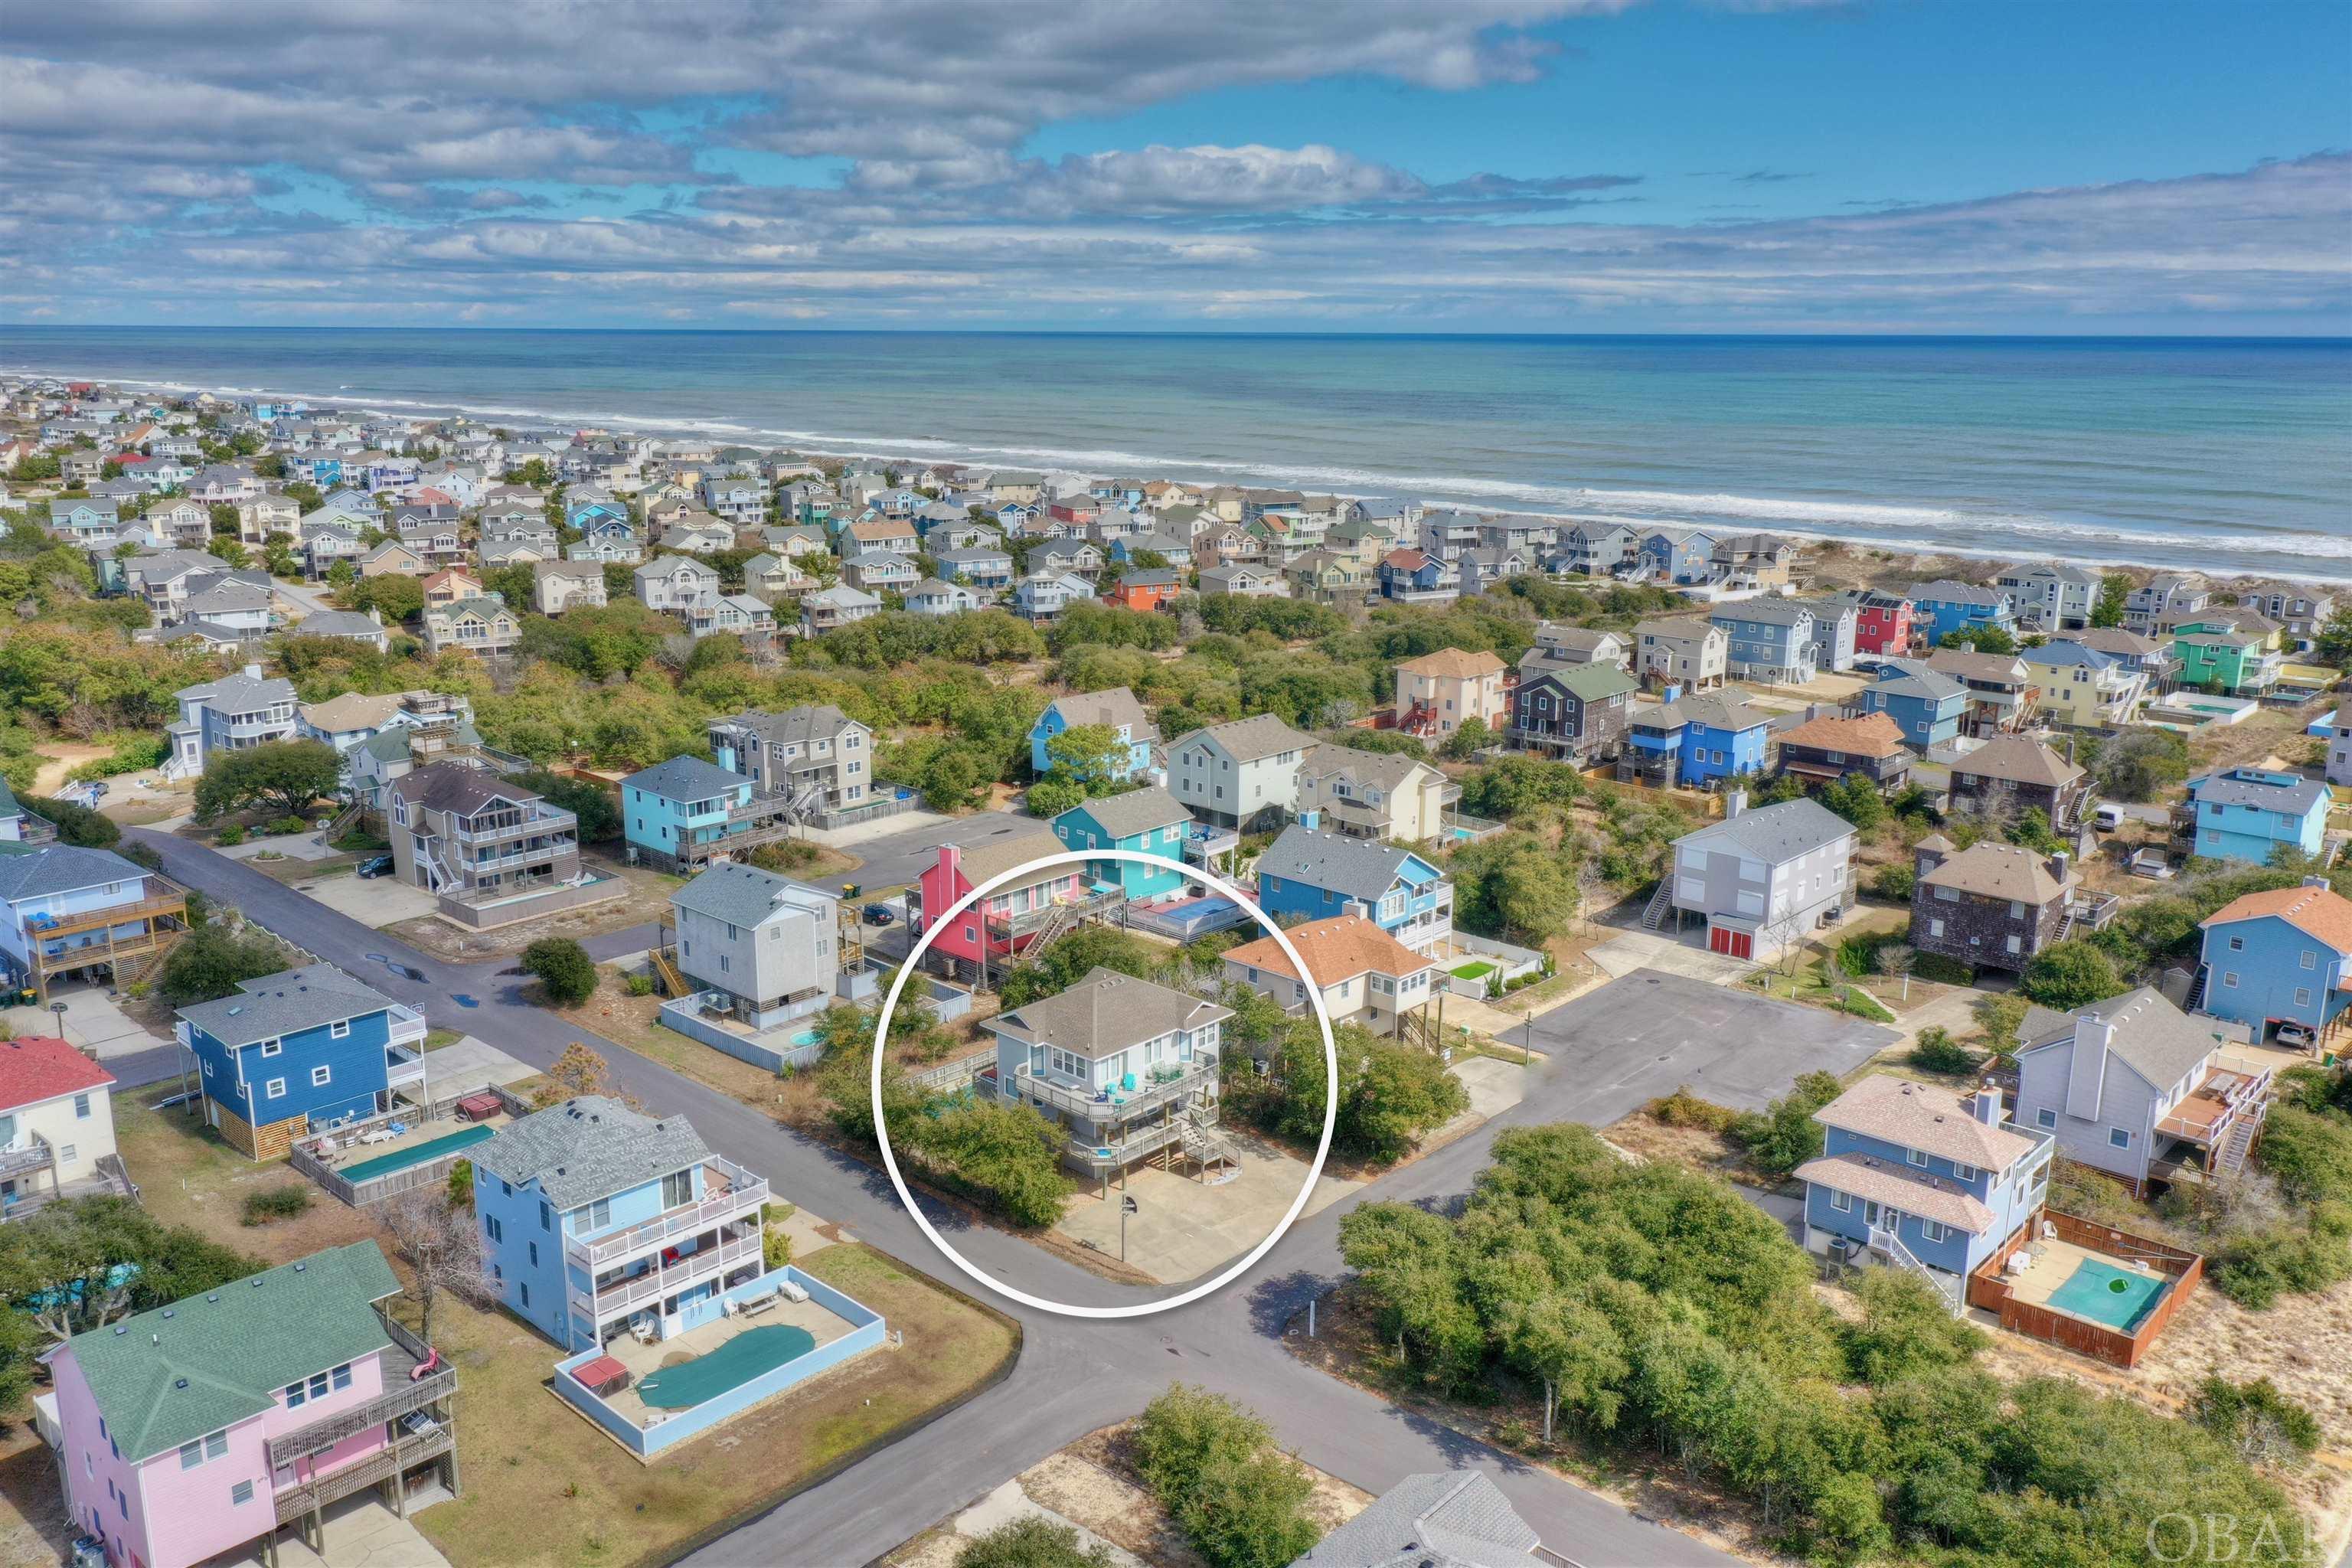 749 Sand Dollar Court, Corolla, NC 27927, 6 Bedrooms Bedrooms, ,4 BathroomsBathrooms,Residential,For sale,Sand Dollar Court,124952